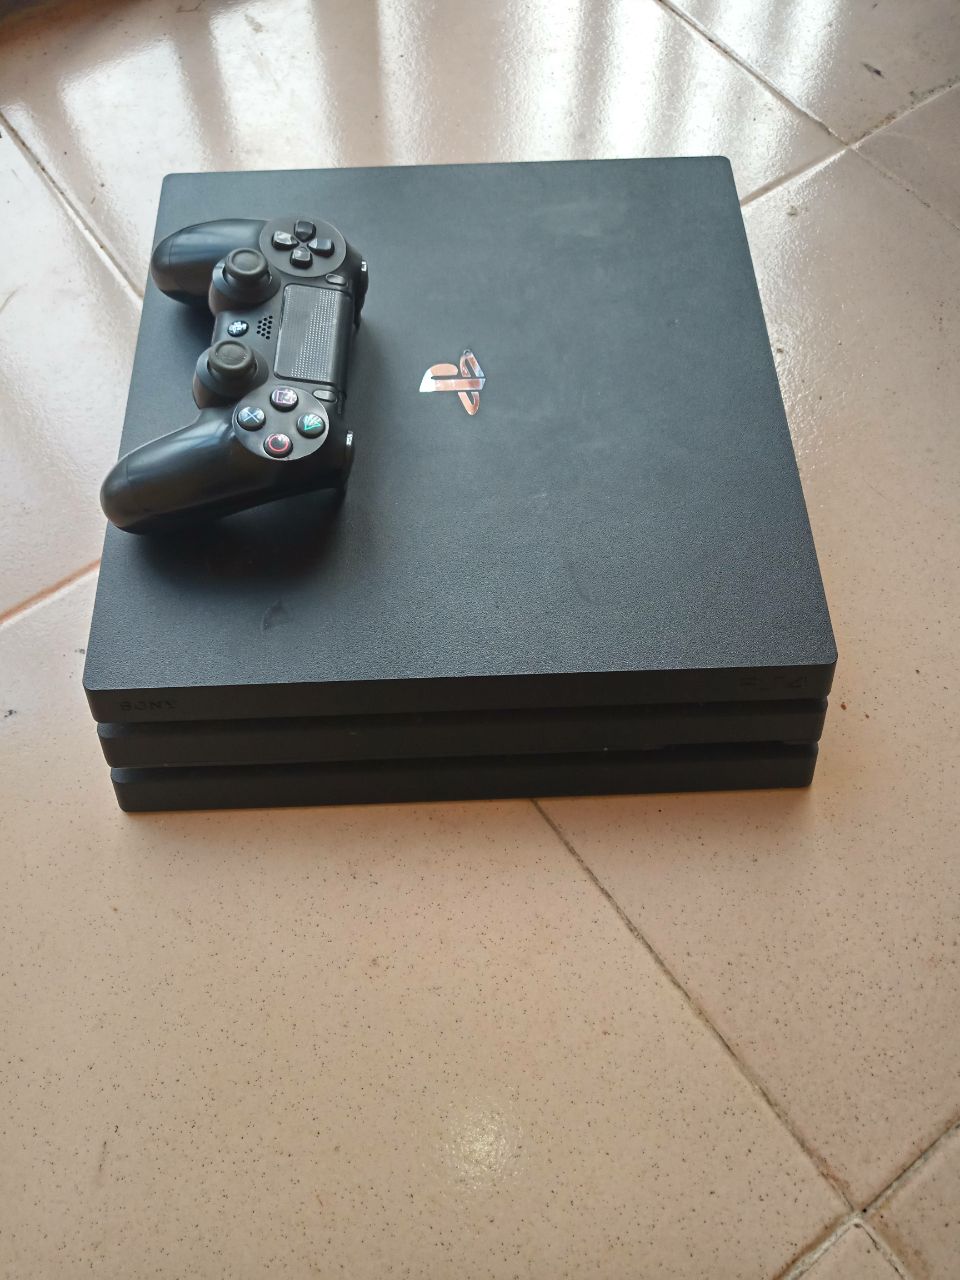 Ps4 Fat, Slim, Pro For Sale (brand New/ UK Used) - Gaming - Nigeria